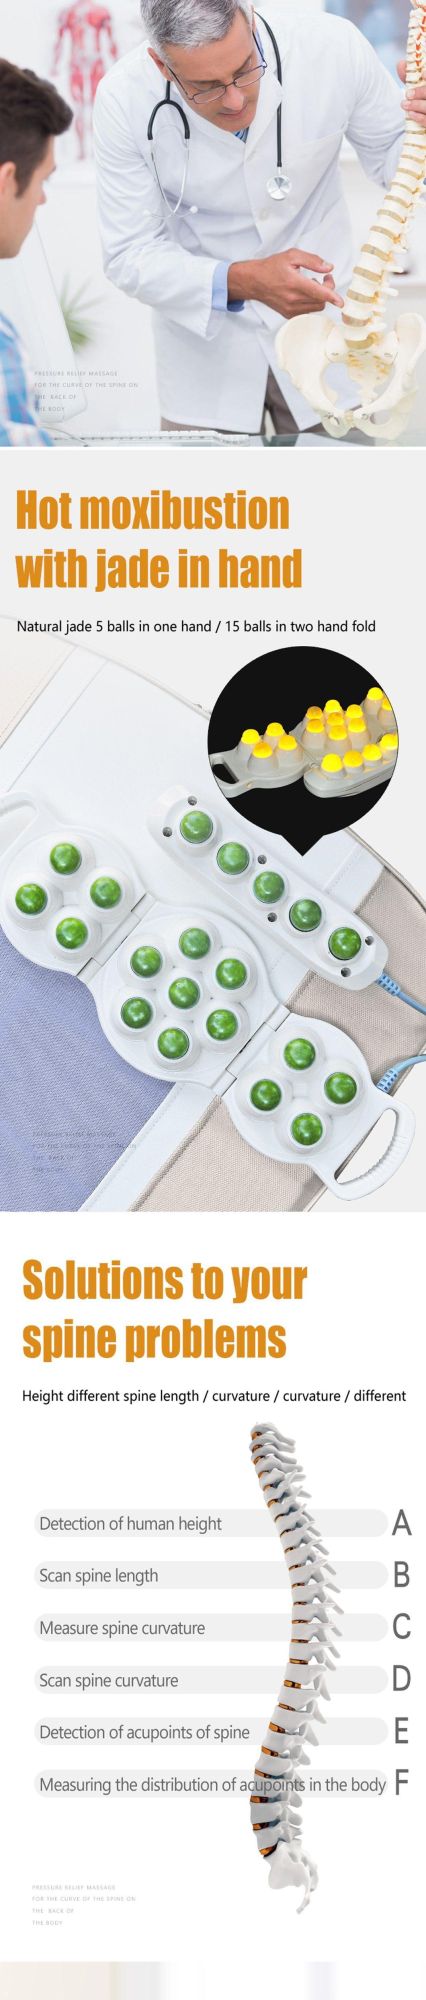 Most Popular Stretching Thermal Jade Physiothereapy Cheaper Price Massage Table for The Aged